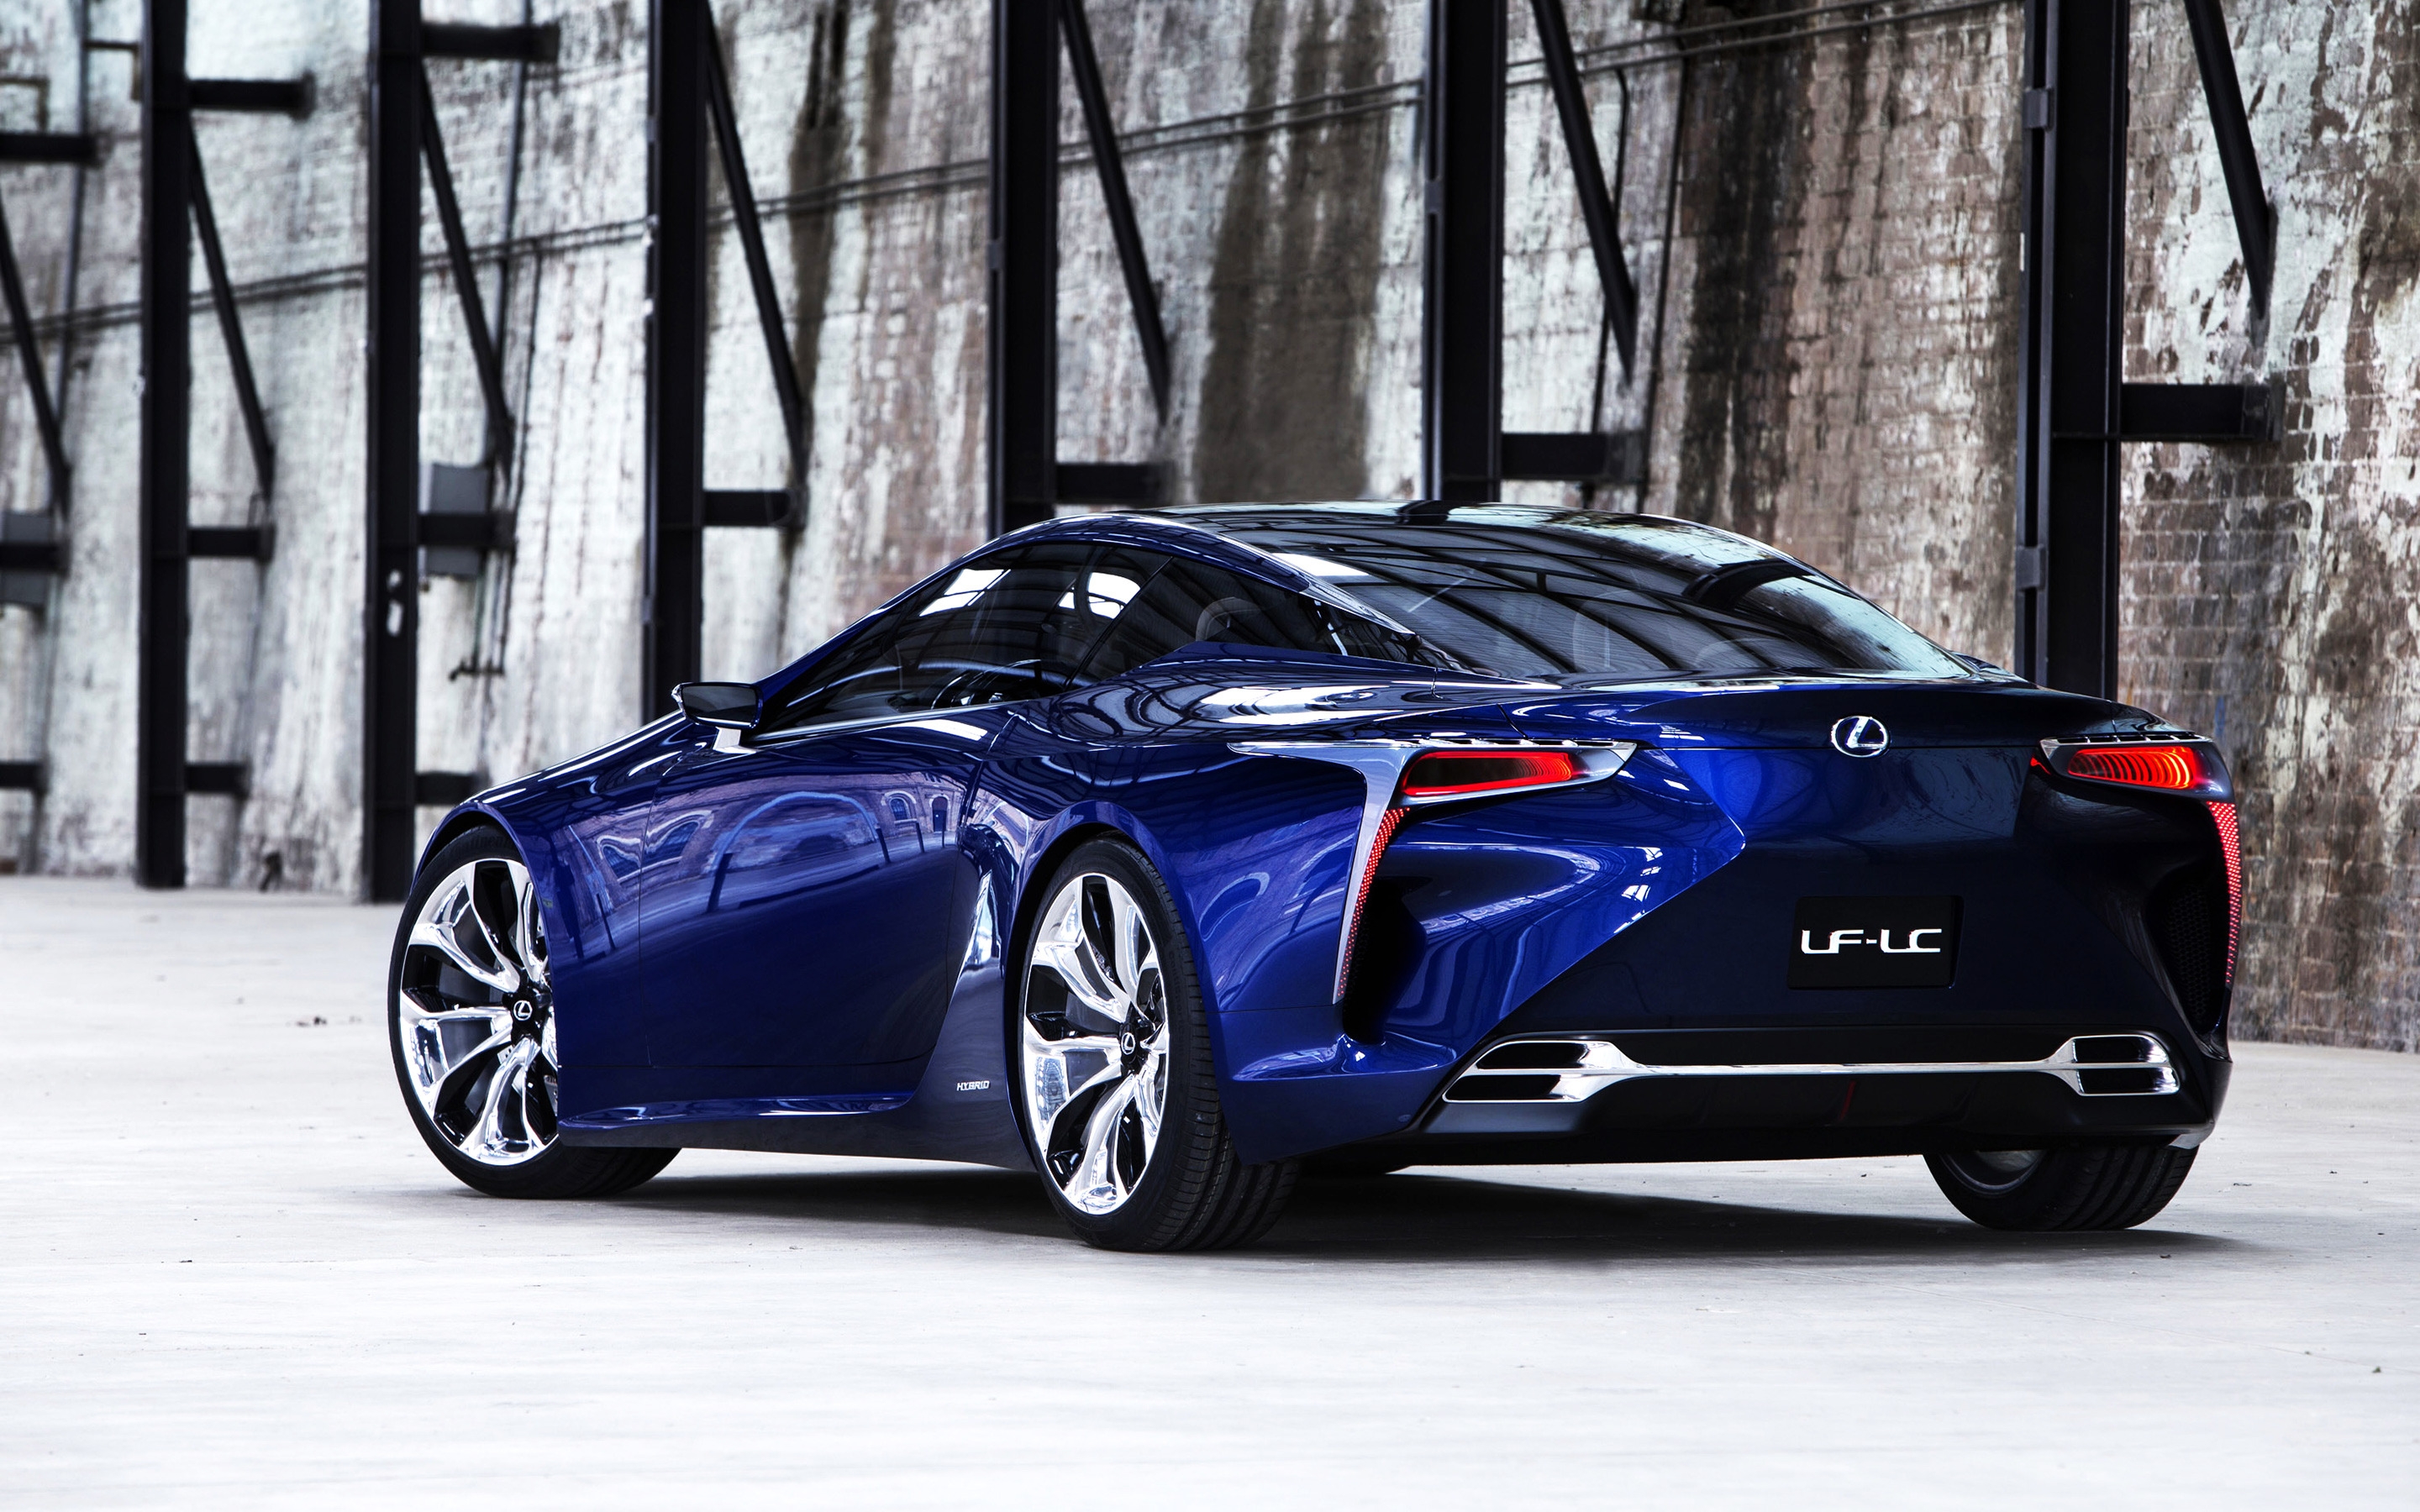 Rear Of Lexus LF-LC Concept for 2880 x 1800 Retina Display resolution